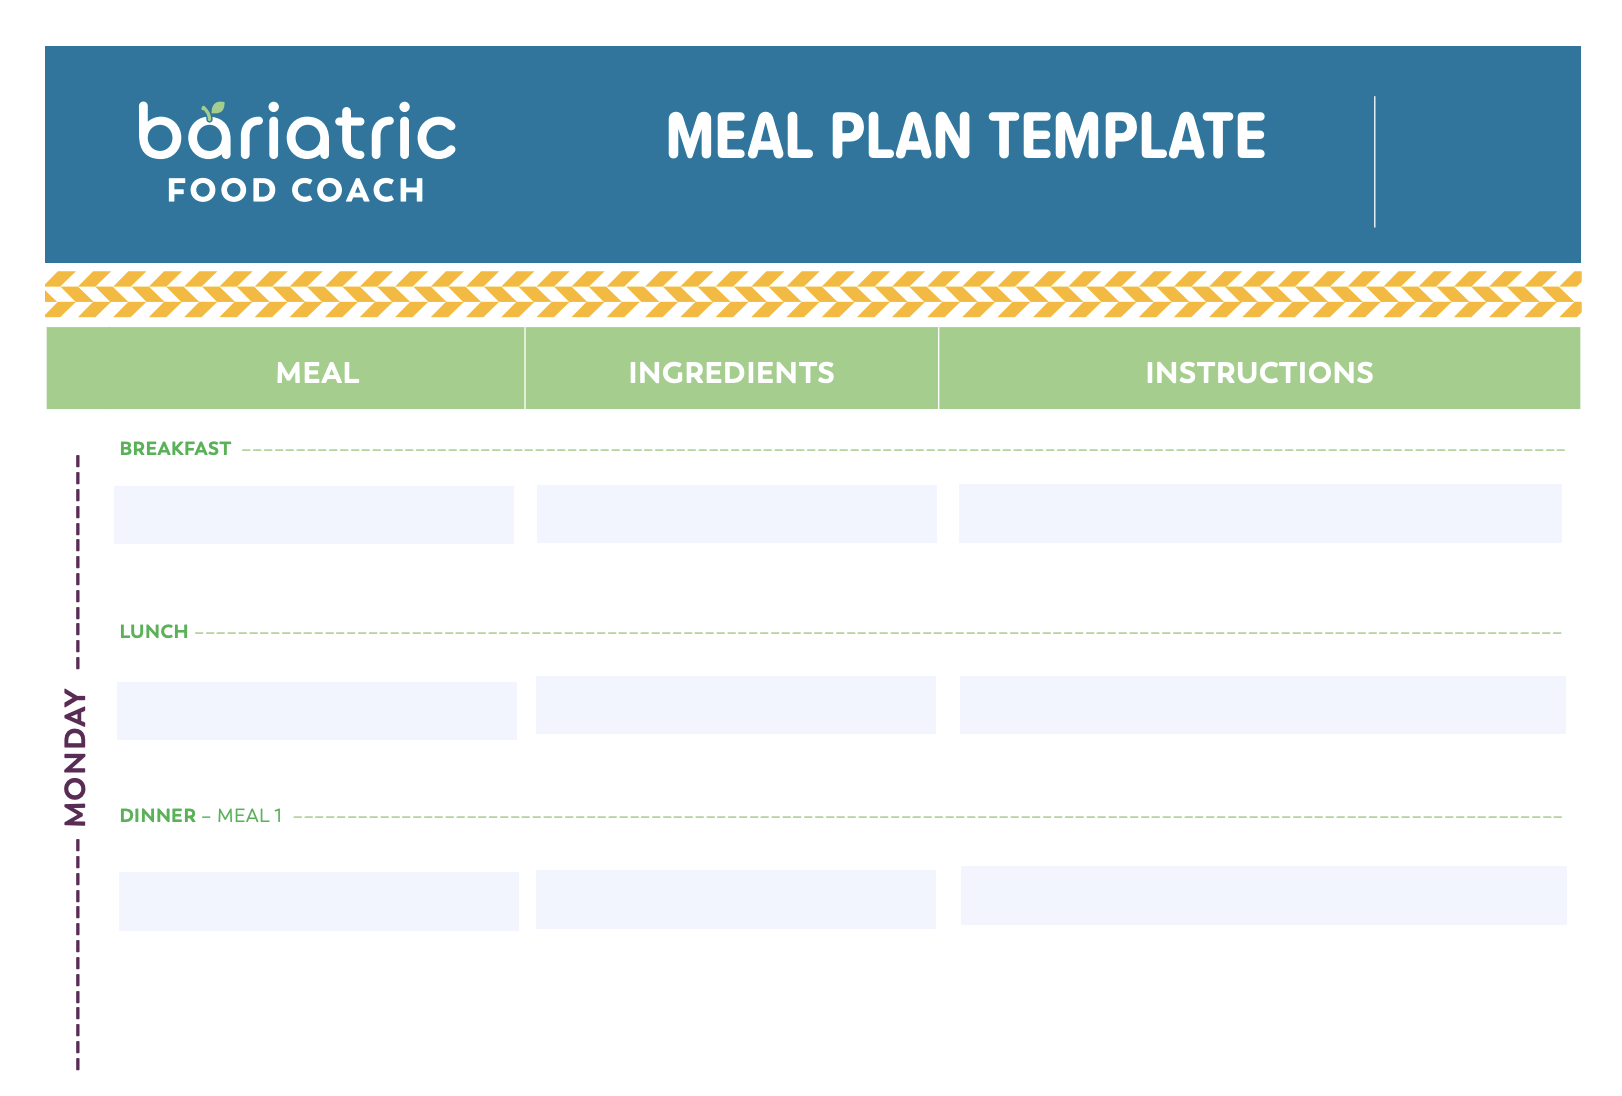 Bariatric Meal Plan Template Bariatric Food Coach